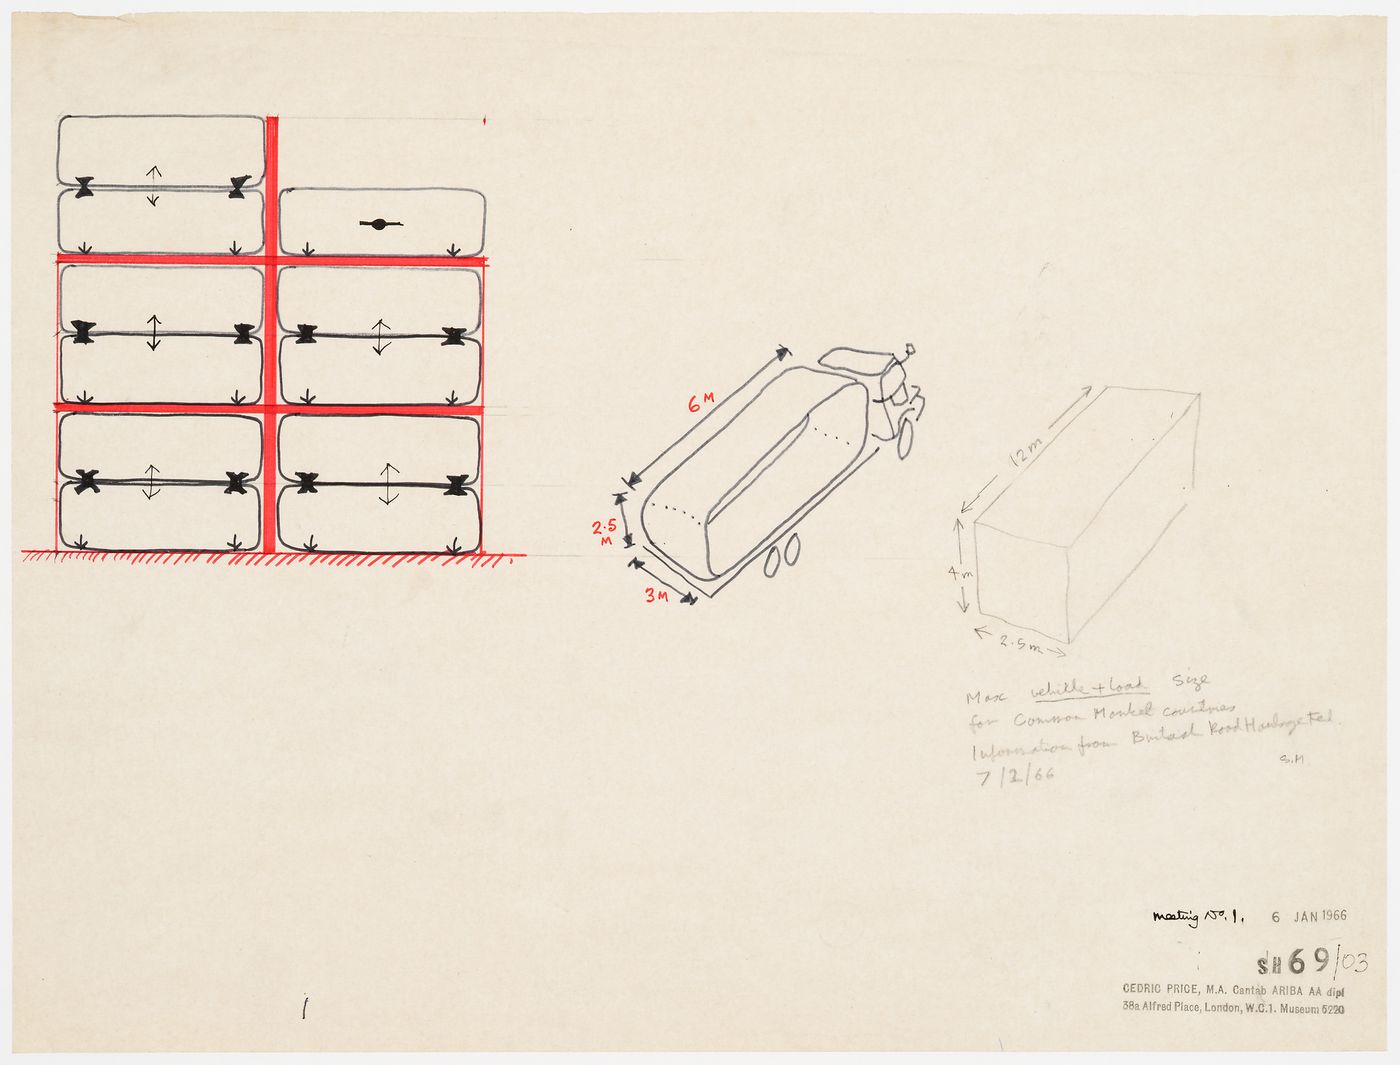 Steel Housing: sketch illustrating distribution of loads for superimposed units, with sketches and notes on vehicle and load size for transportation of units